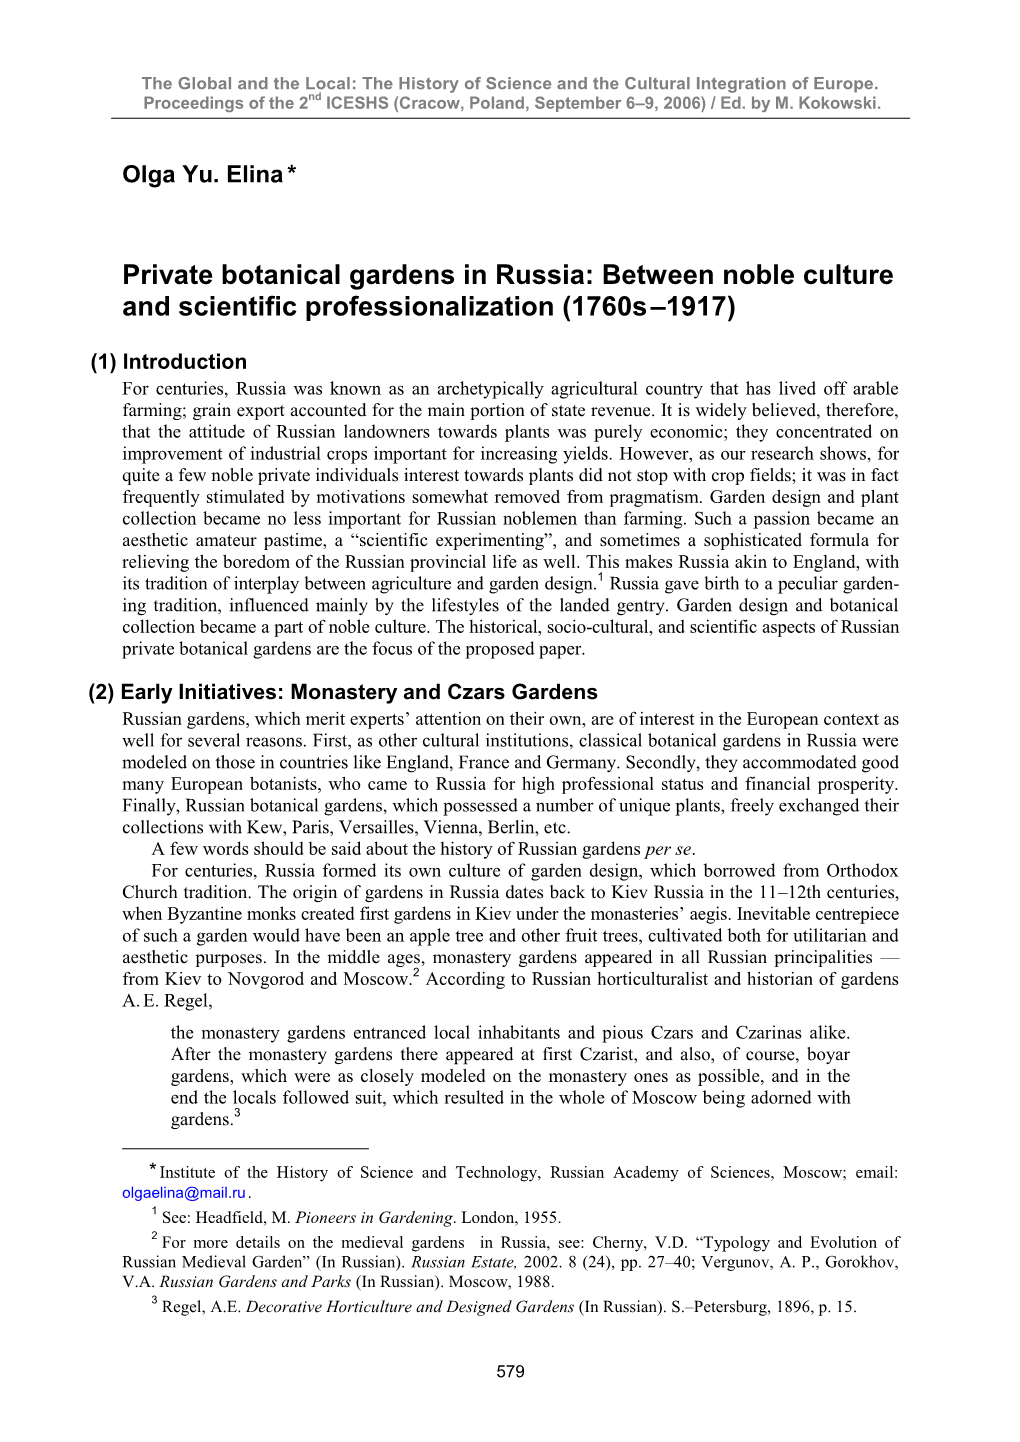 Private Botanical Gardens in Russia: Between Noble Culture